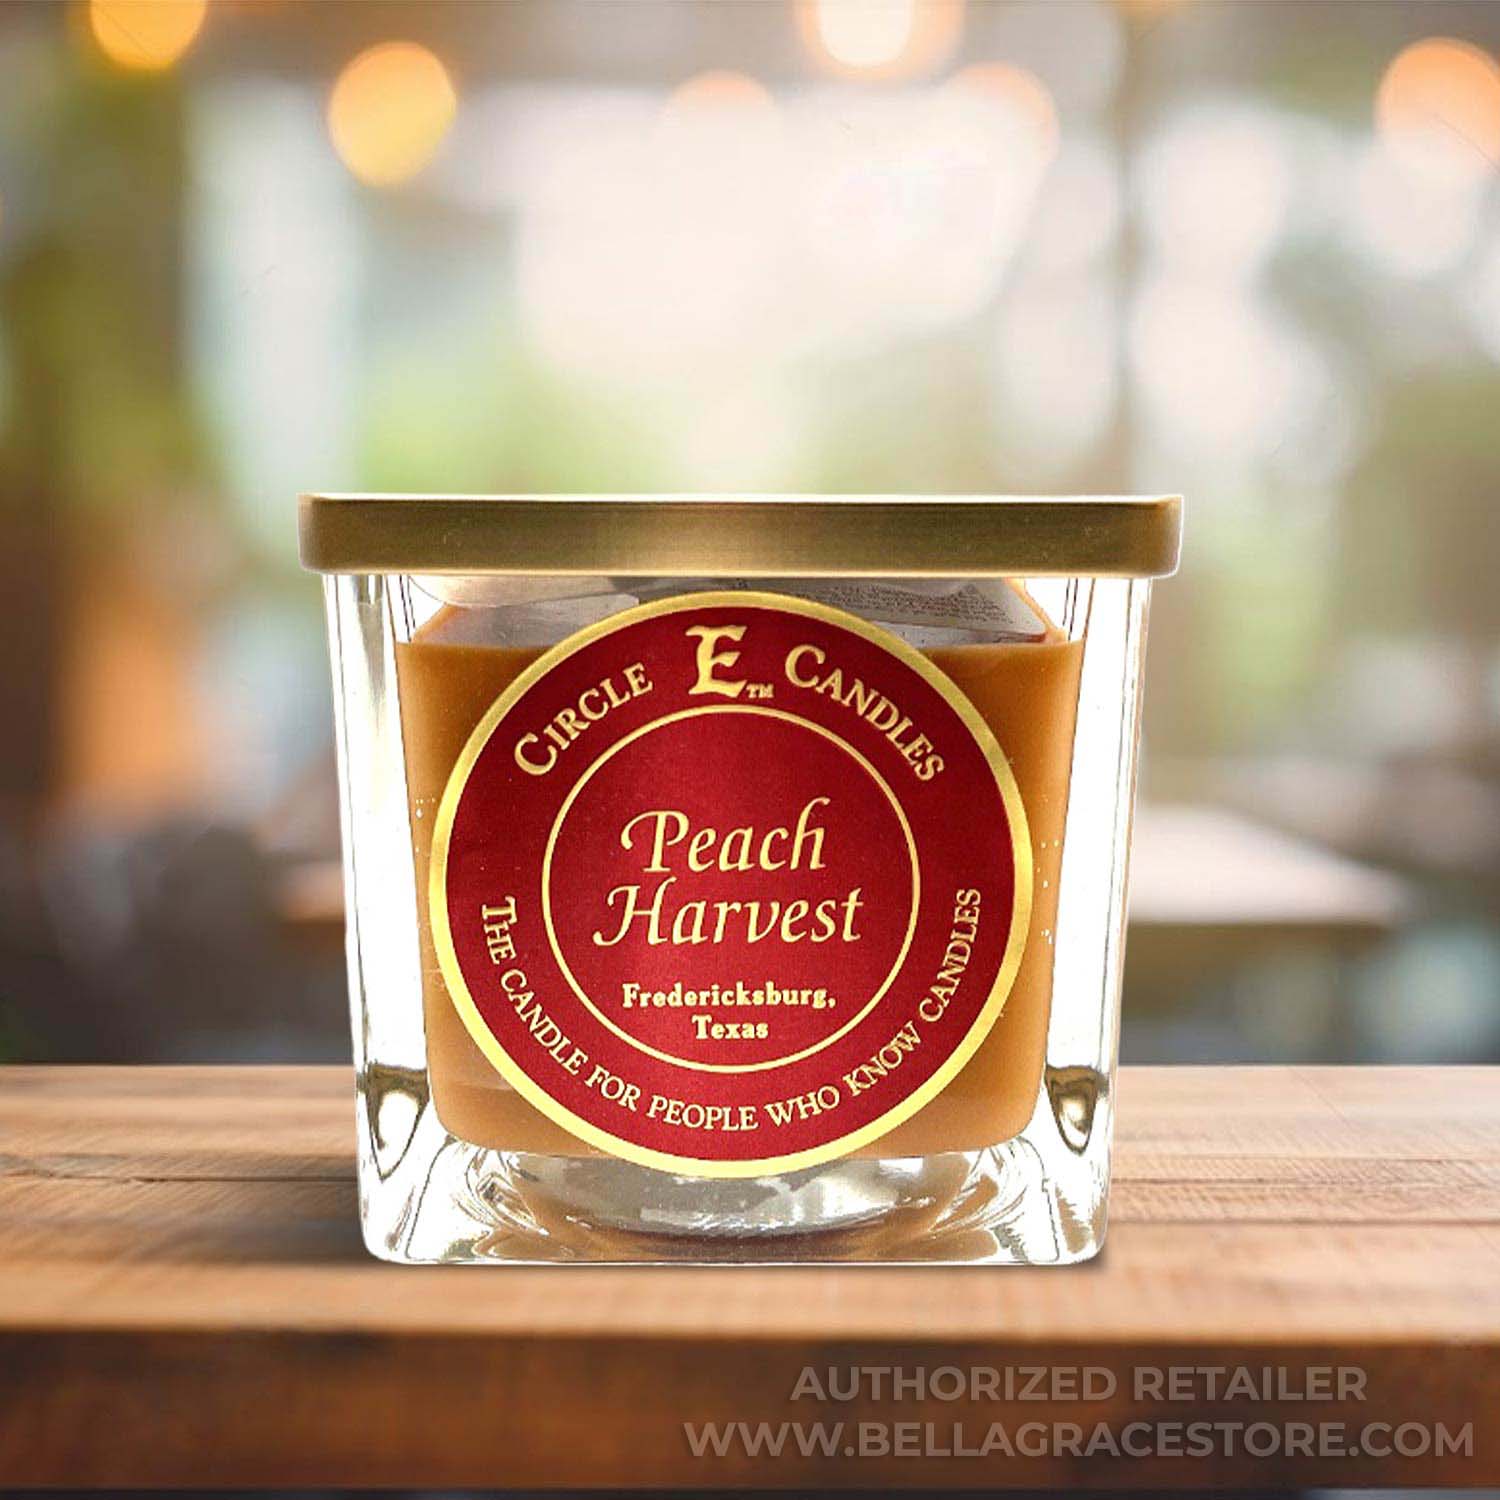 Circle E Candles, Peach Harvest Scent, Small Size Jar Candle, 8oz, 1 Wick